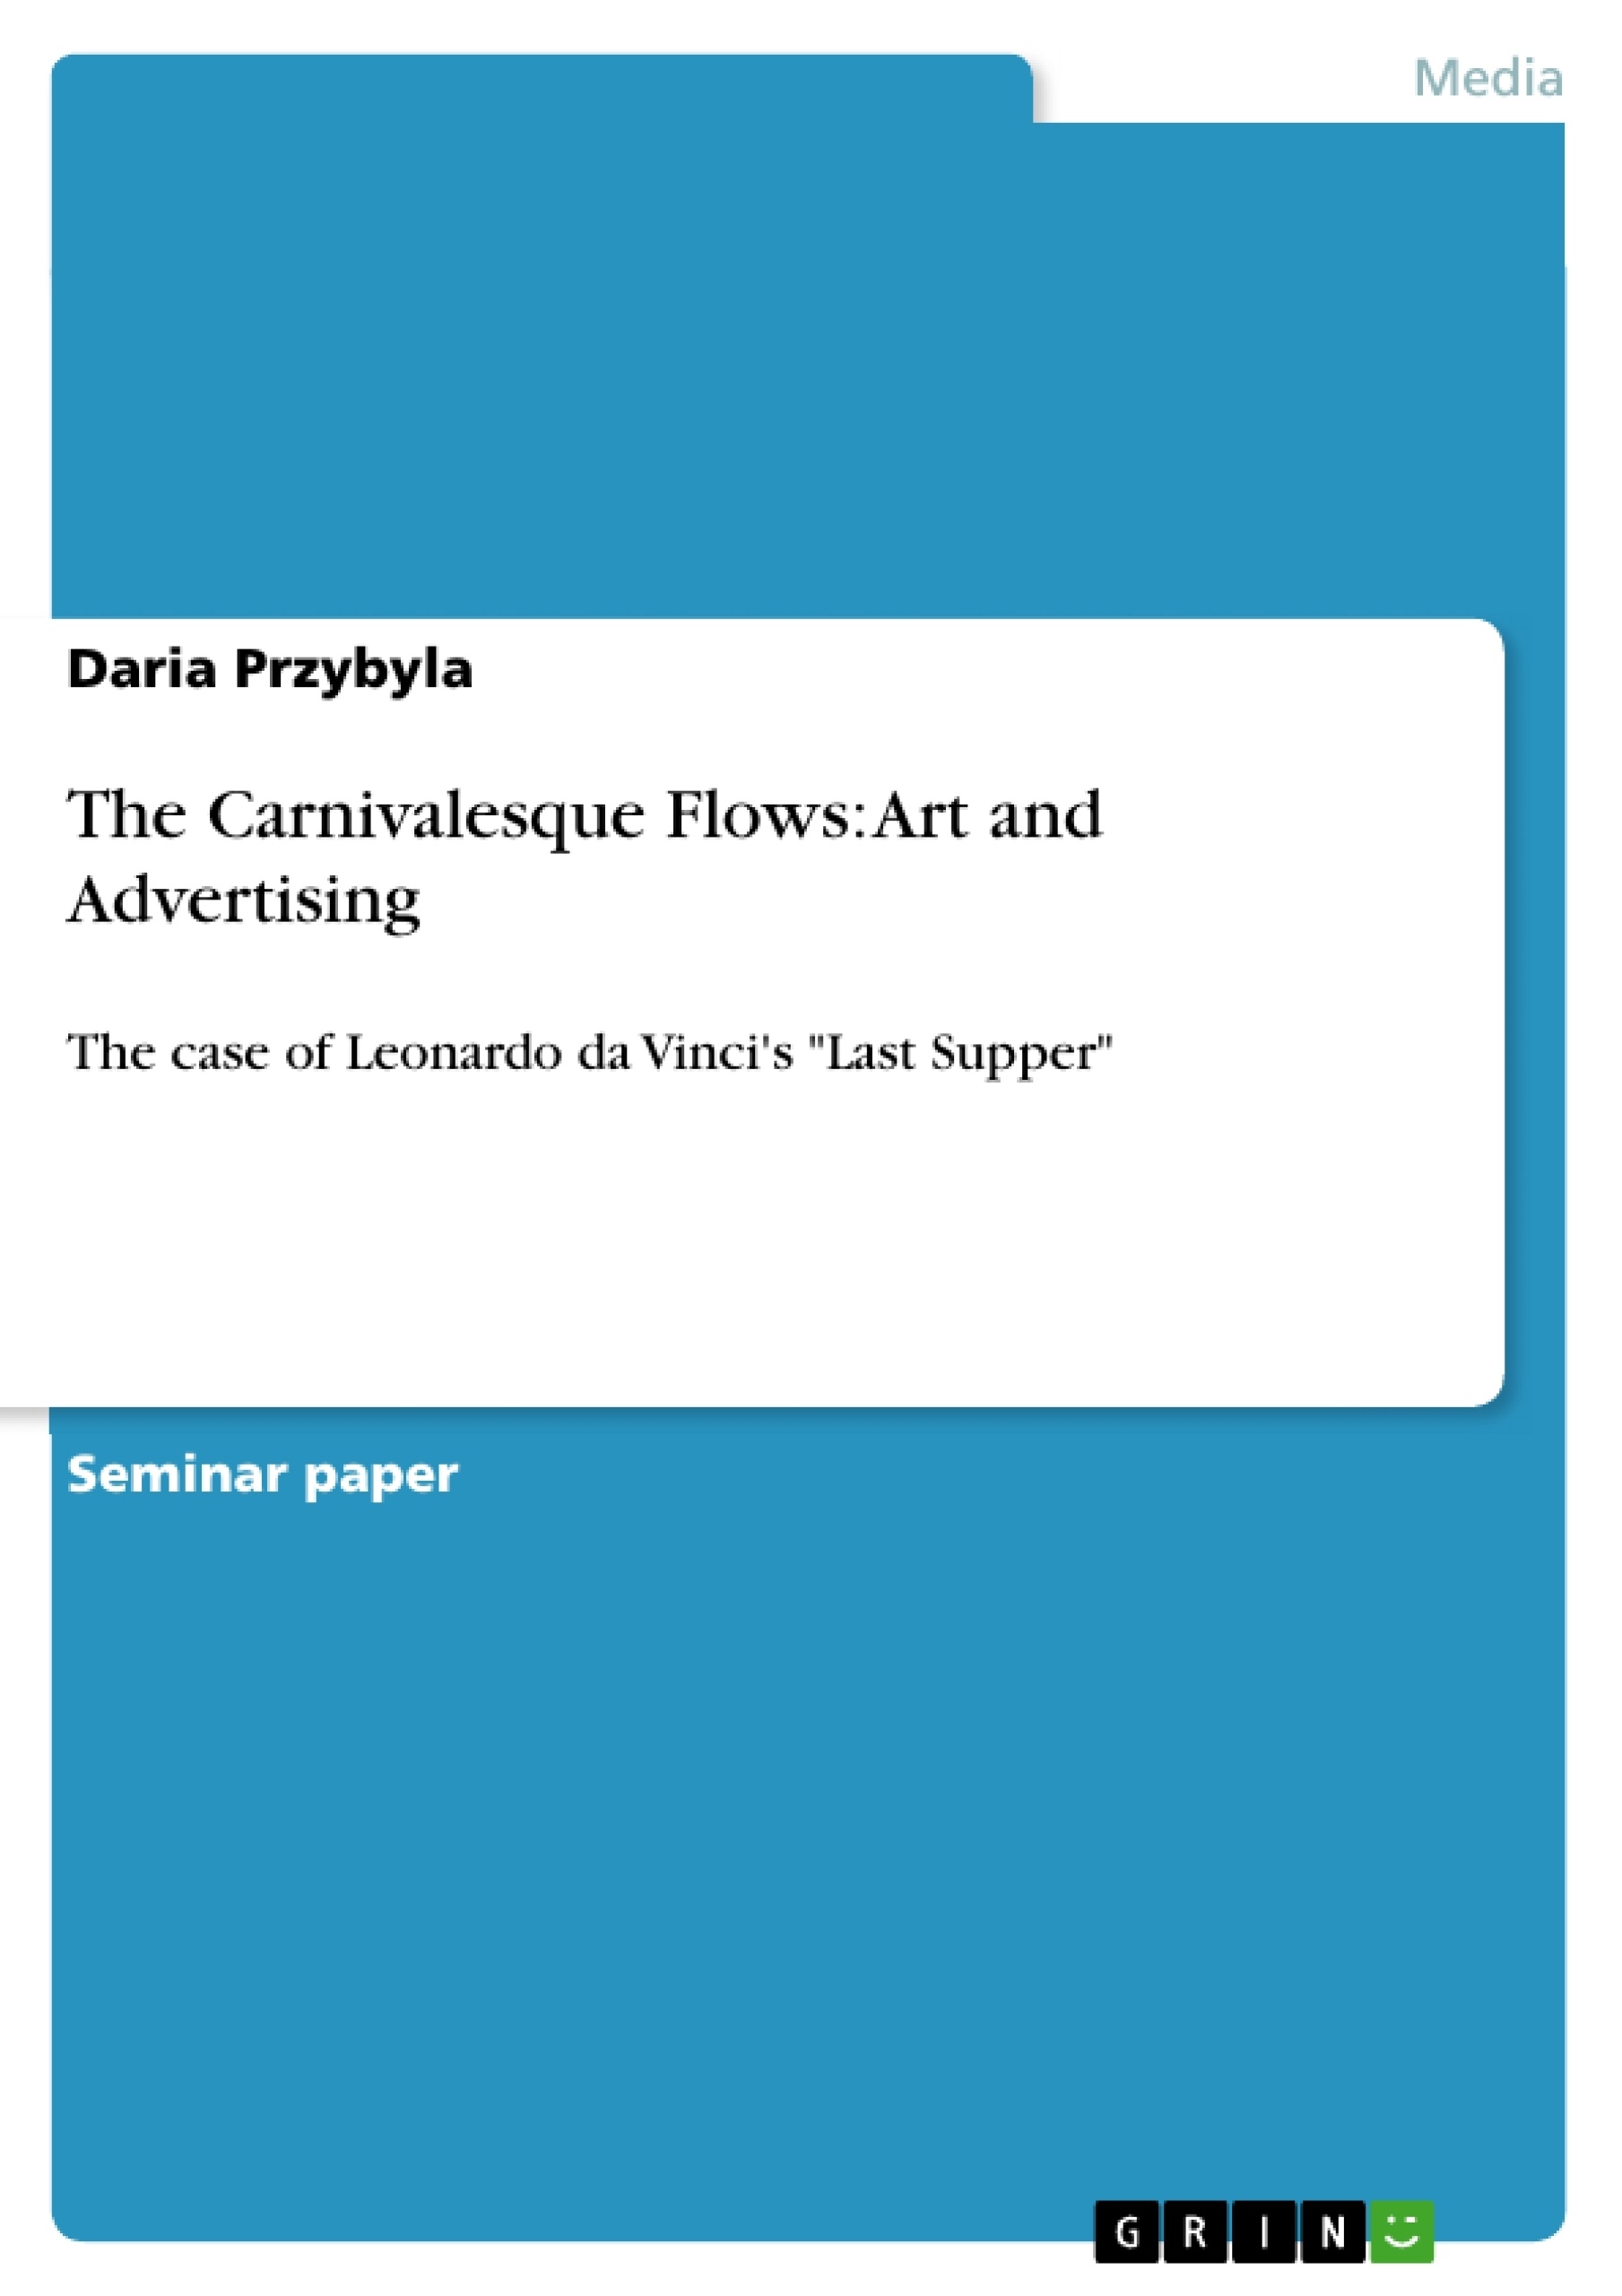 Titel: The Carnivalesque Flows: Art and Advertising